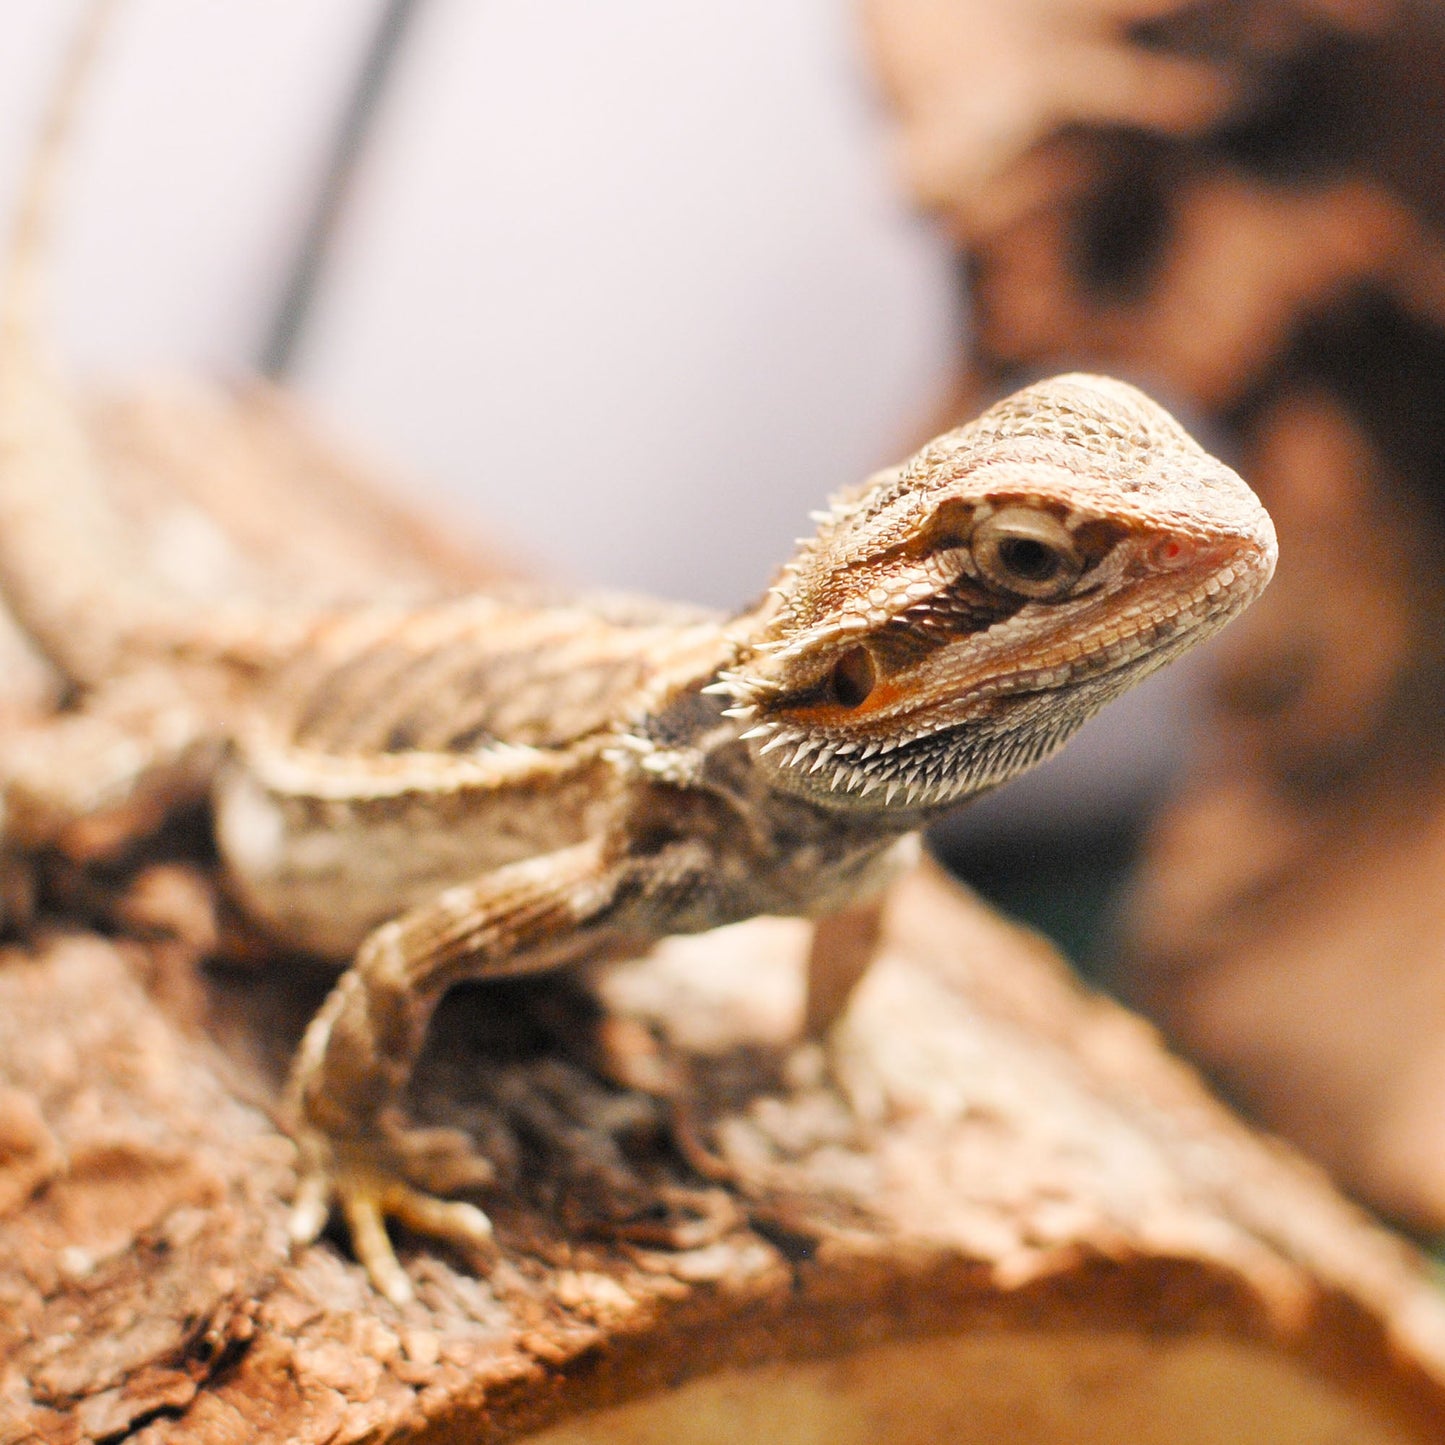 Send Supplies to Rescued Reptiles